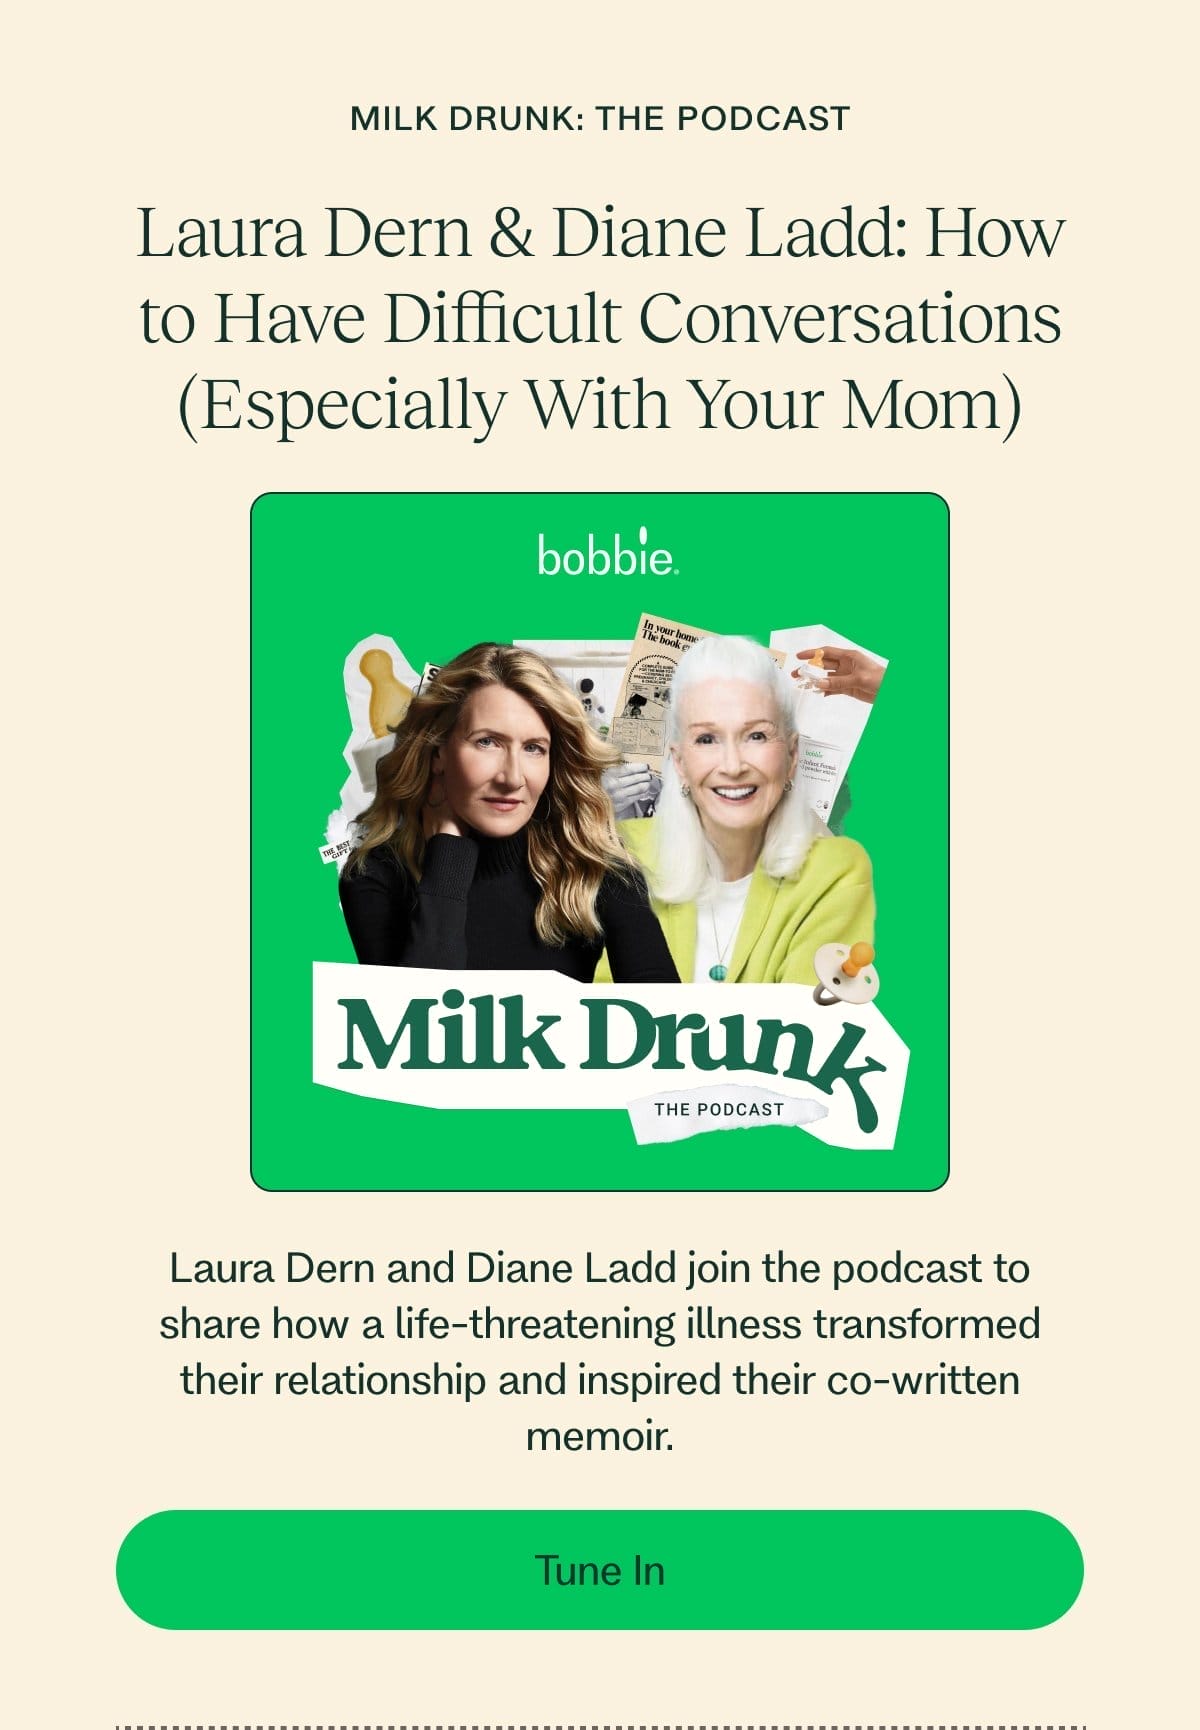 Milk Drunk: The Podcast Laura Dern & Diane Ladd: How to Have Difficult Conversations (Especially With Your Mom) Laura Dern and Diane Ladd join the podcast to share how a life-threatening illness transformed their relationship and inspired their co-written memoir. Tune In